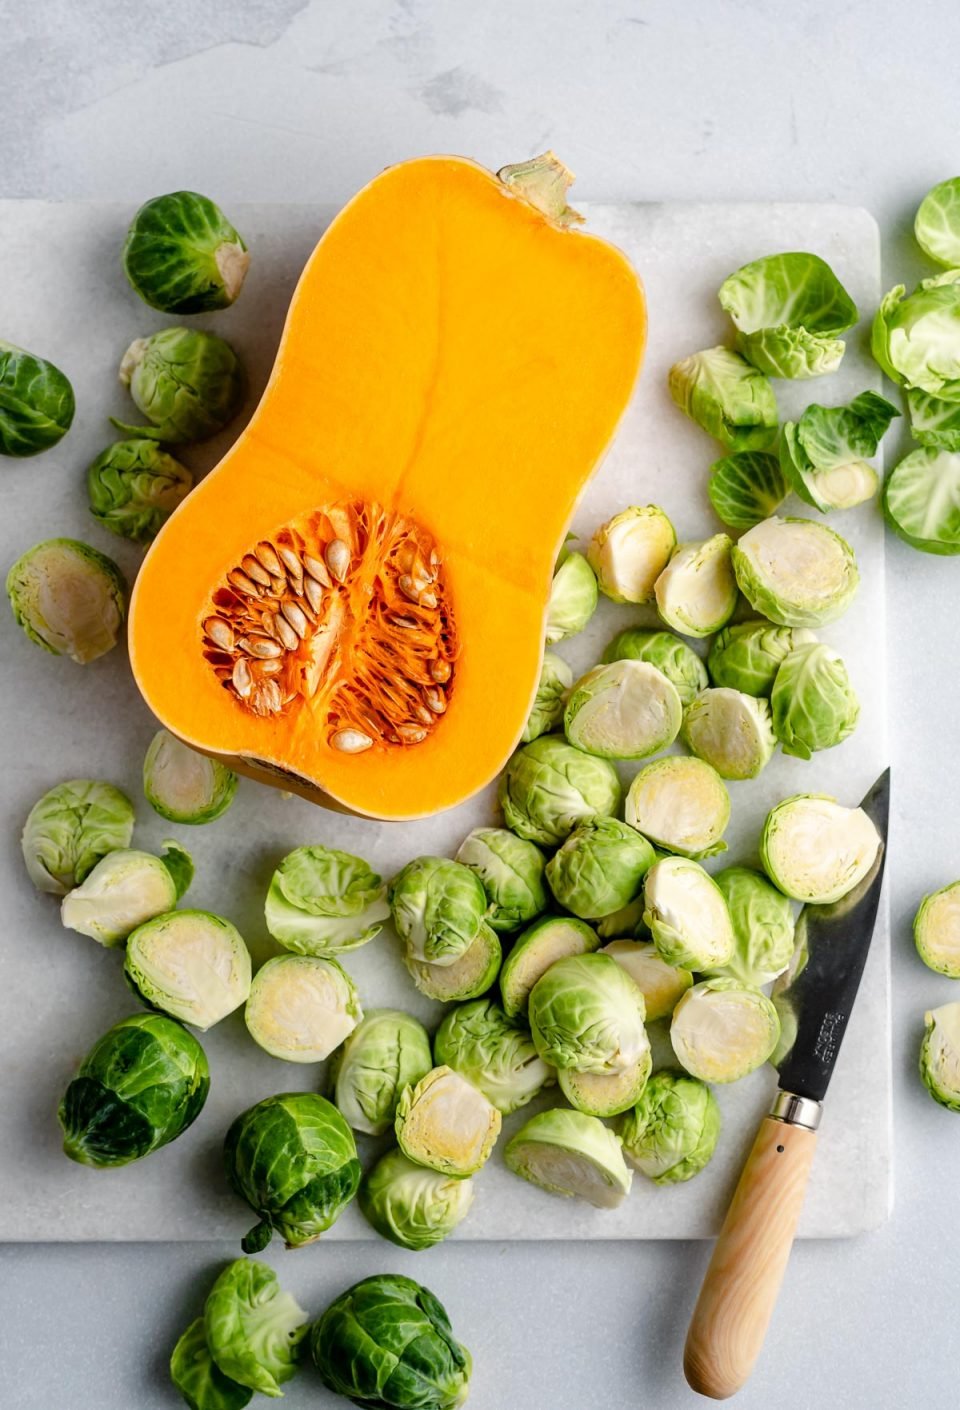 Chicken sausage sheet pan prep: a peeled & halved butternut squash with trimmed & halved Brussels sprouts on a white cutting board with a small paring knife.